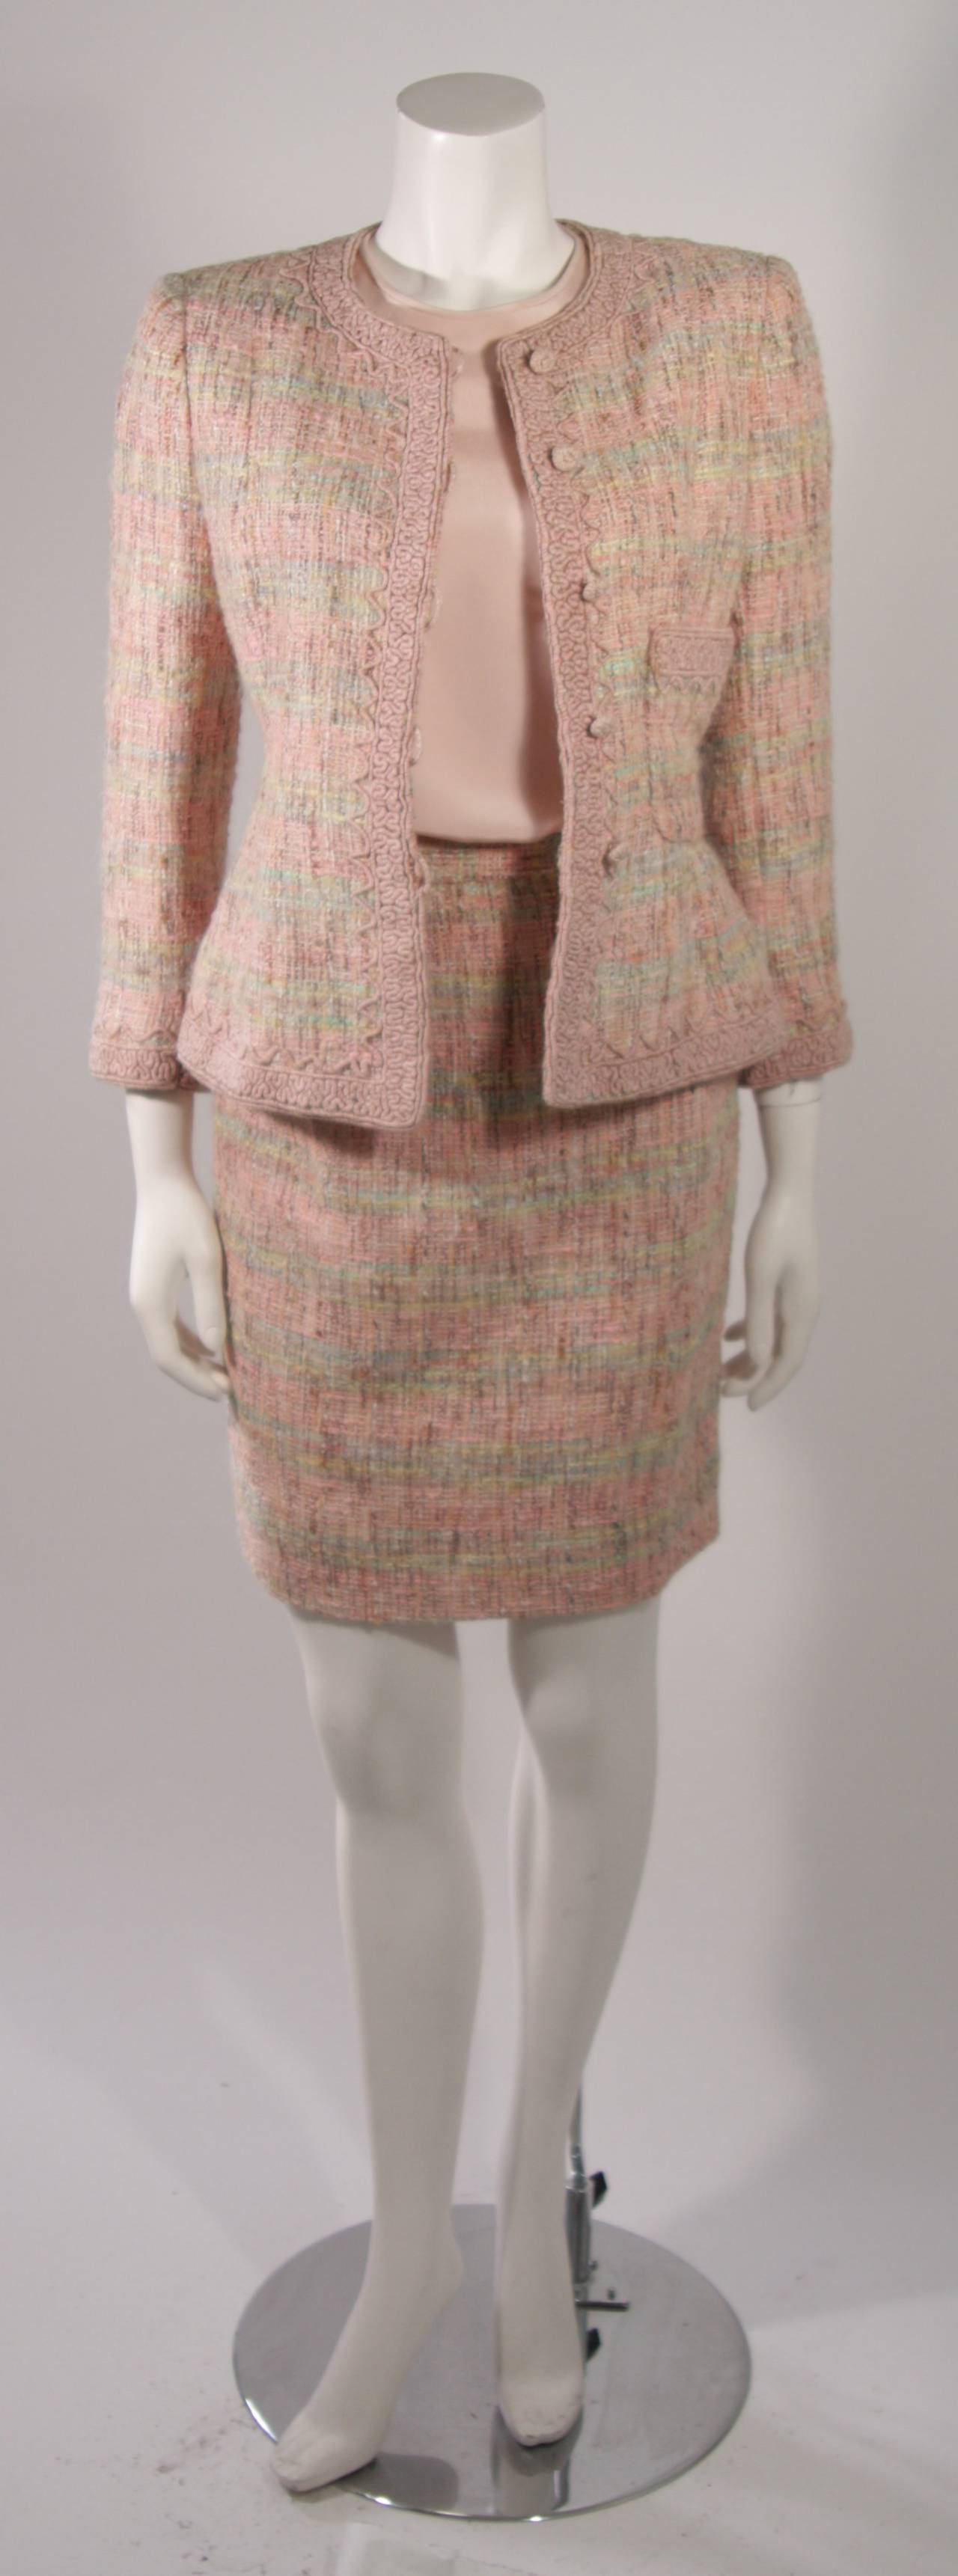 This is an Oscar De La Renta ensemble. The set features four pieces composed of a textured wool tweed accented with a pink embroidery trim, and silk. The jacket features center front buttons and two side front pockets. The skirt has a side zipper